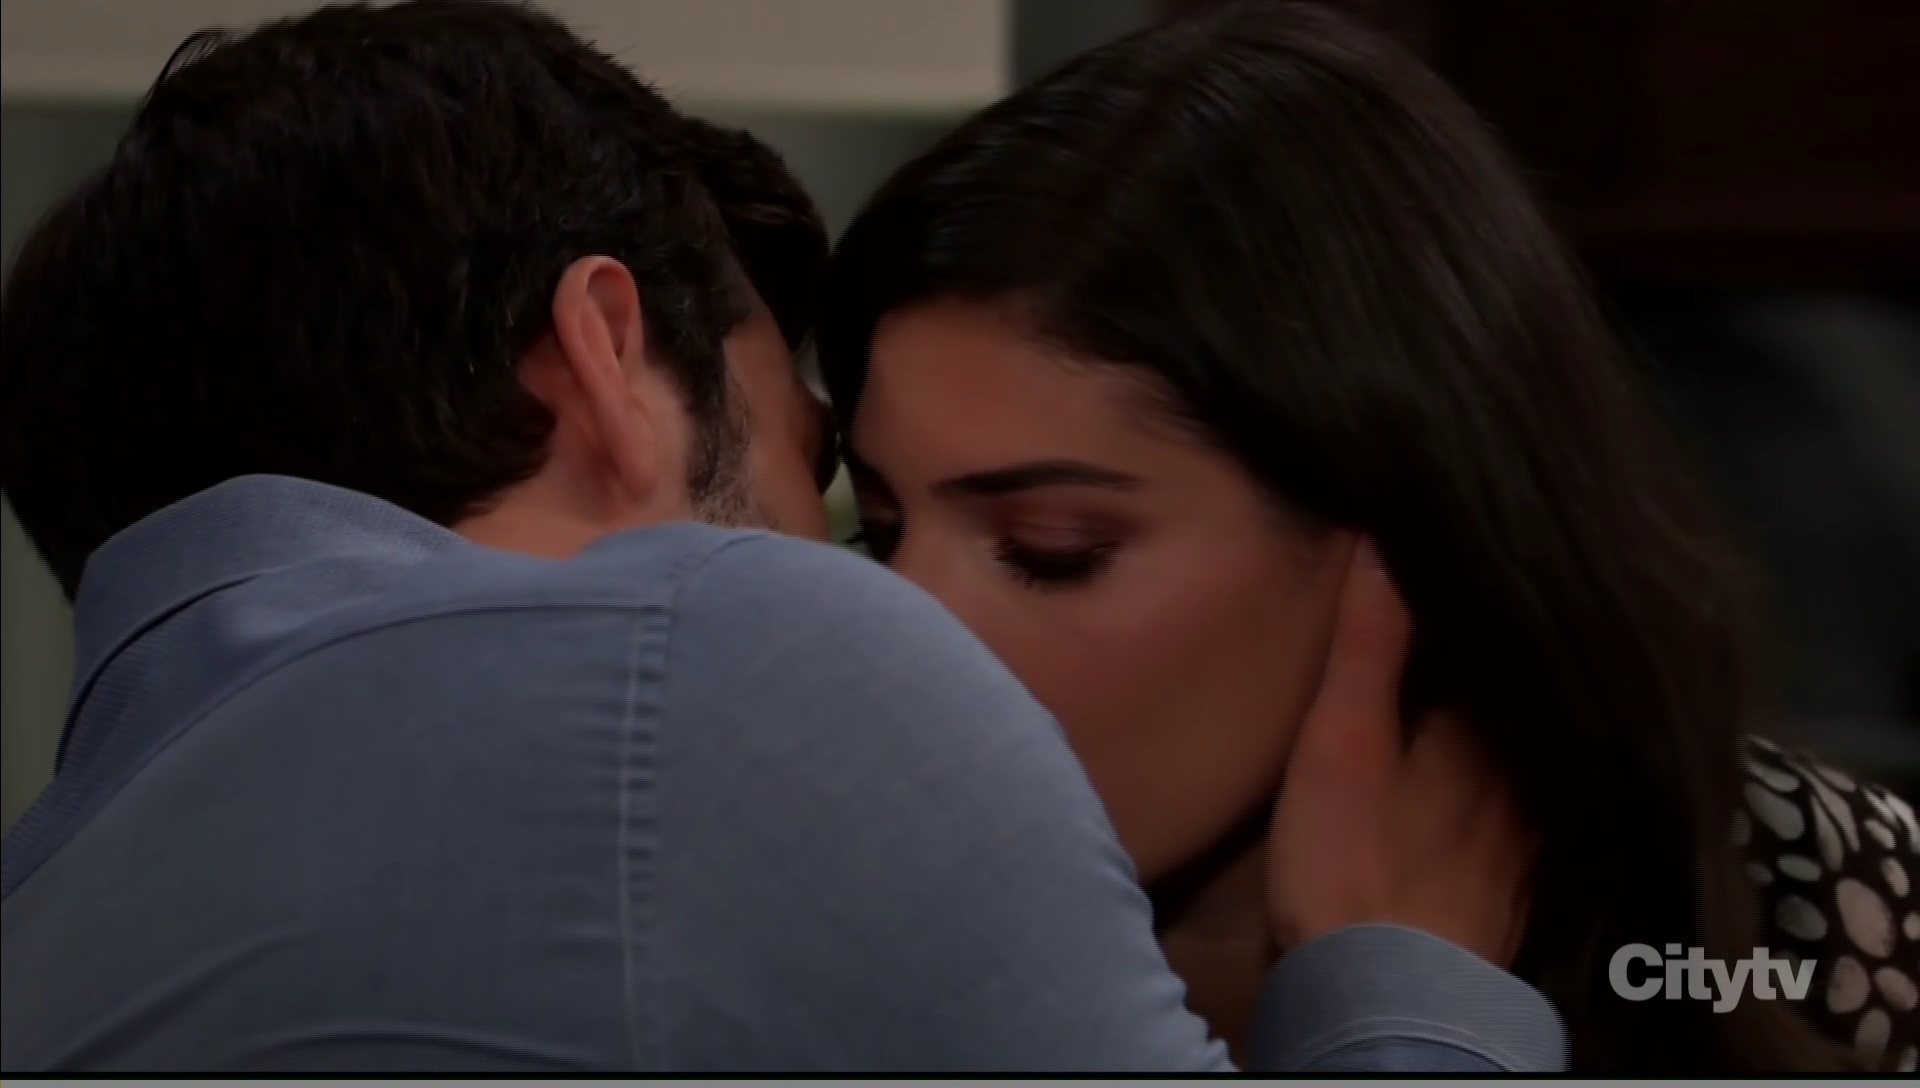 chase brook lynn try to kiss general hospital abc soapsspoilers